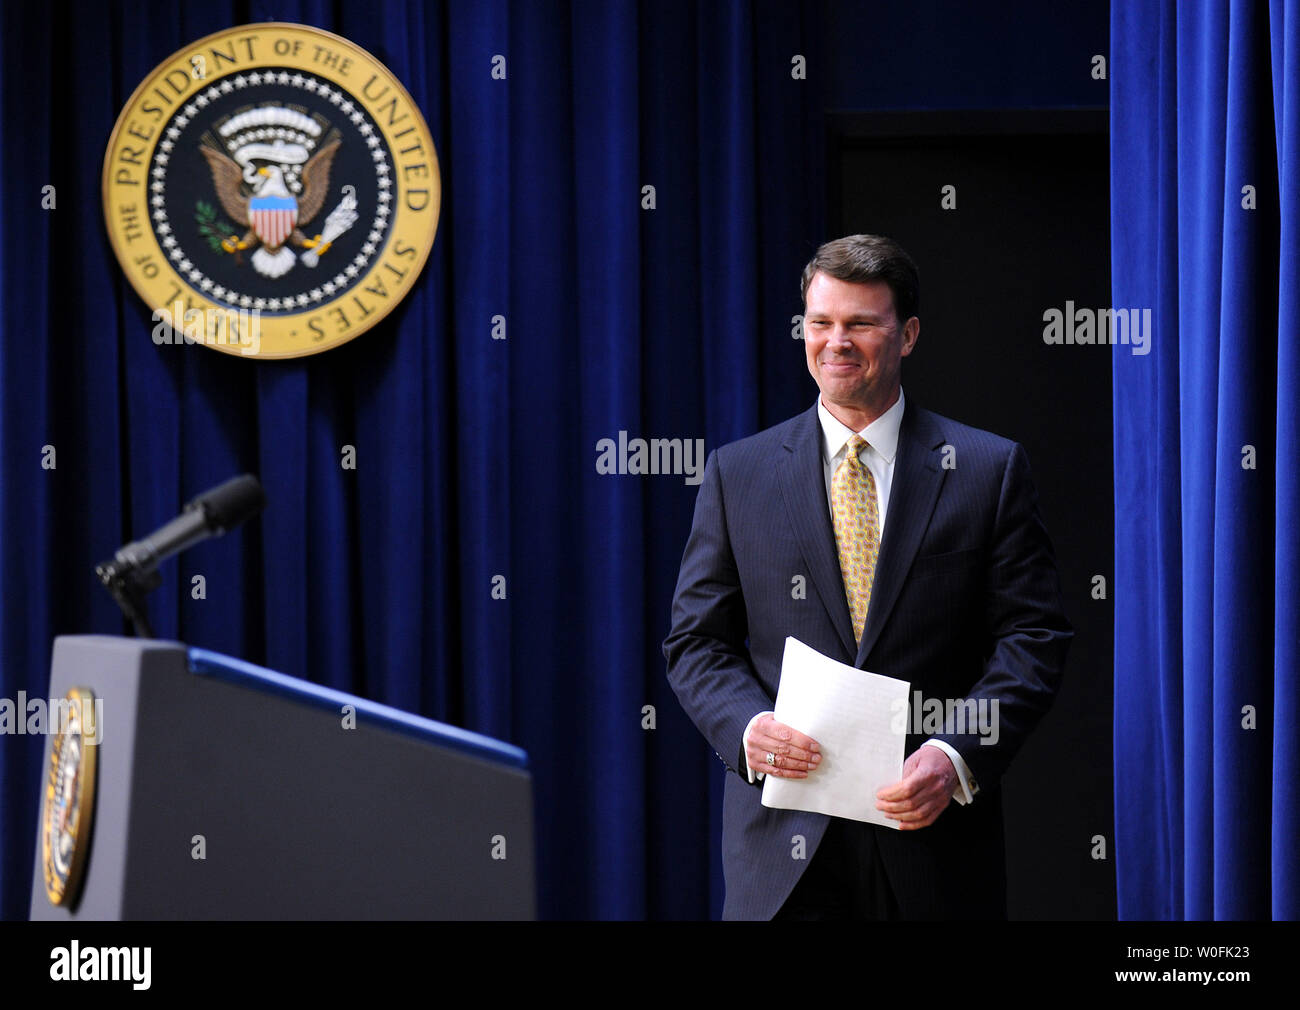 Director of OPM John Berry arrives to deliver remarks at the closing session of the forum for workplace flexibility, in the Eisenhower Executive Office Building in Washington on March 31, 2010. UPI/Kevin Dietsch Stock Photo